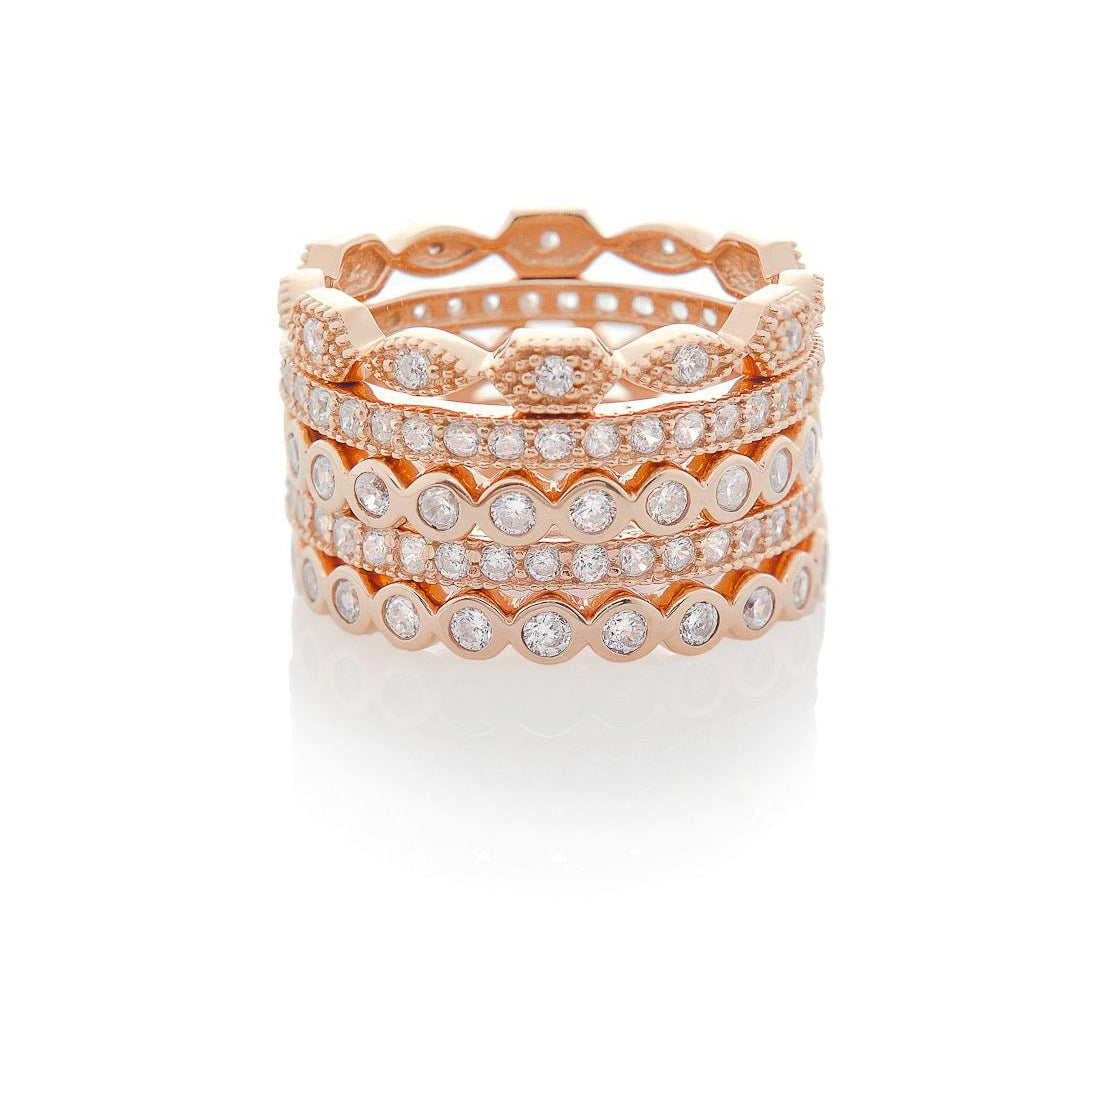 STACKED SHAPES RINGS, ROSE GOLD